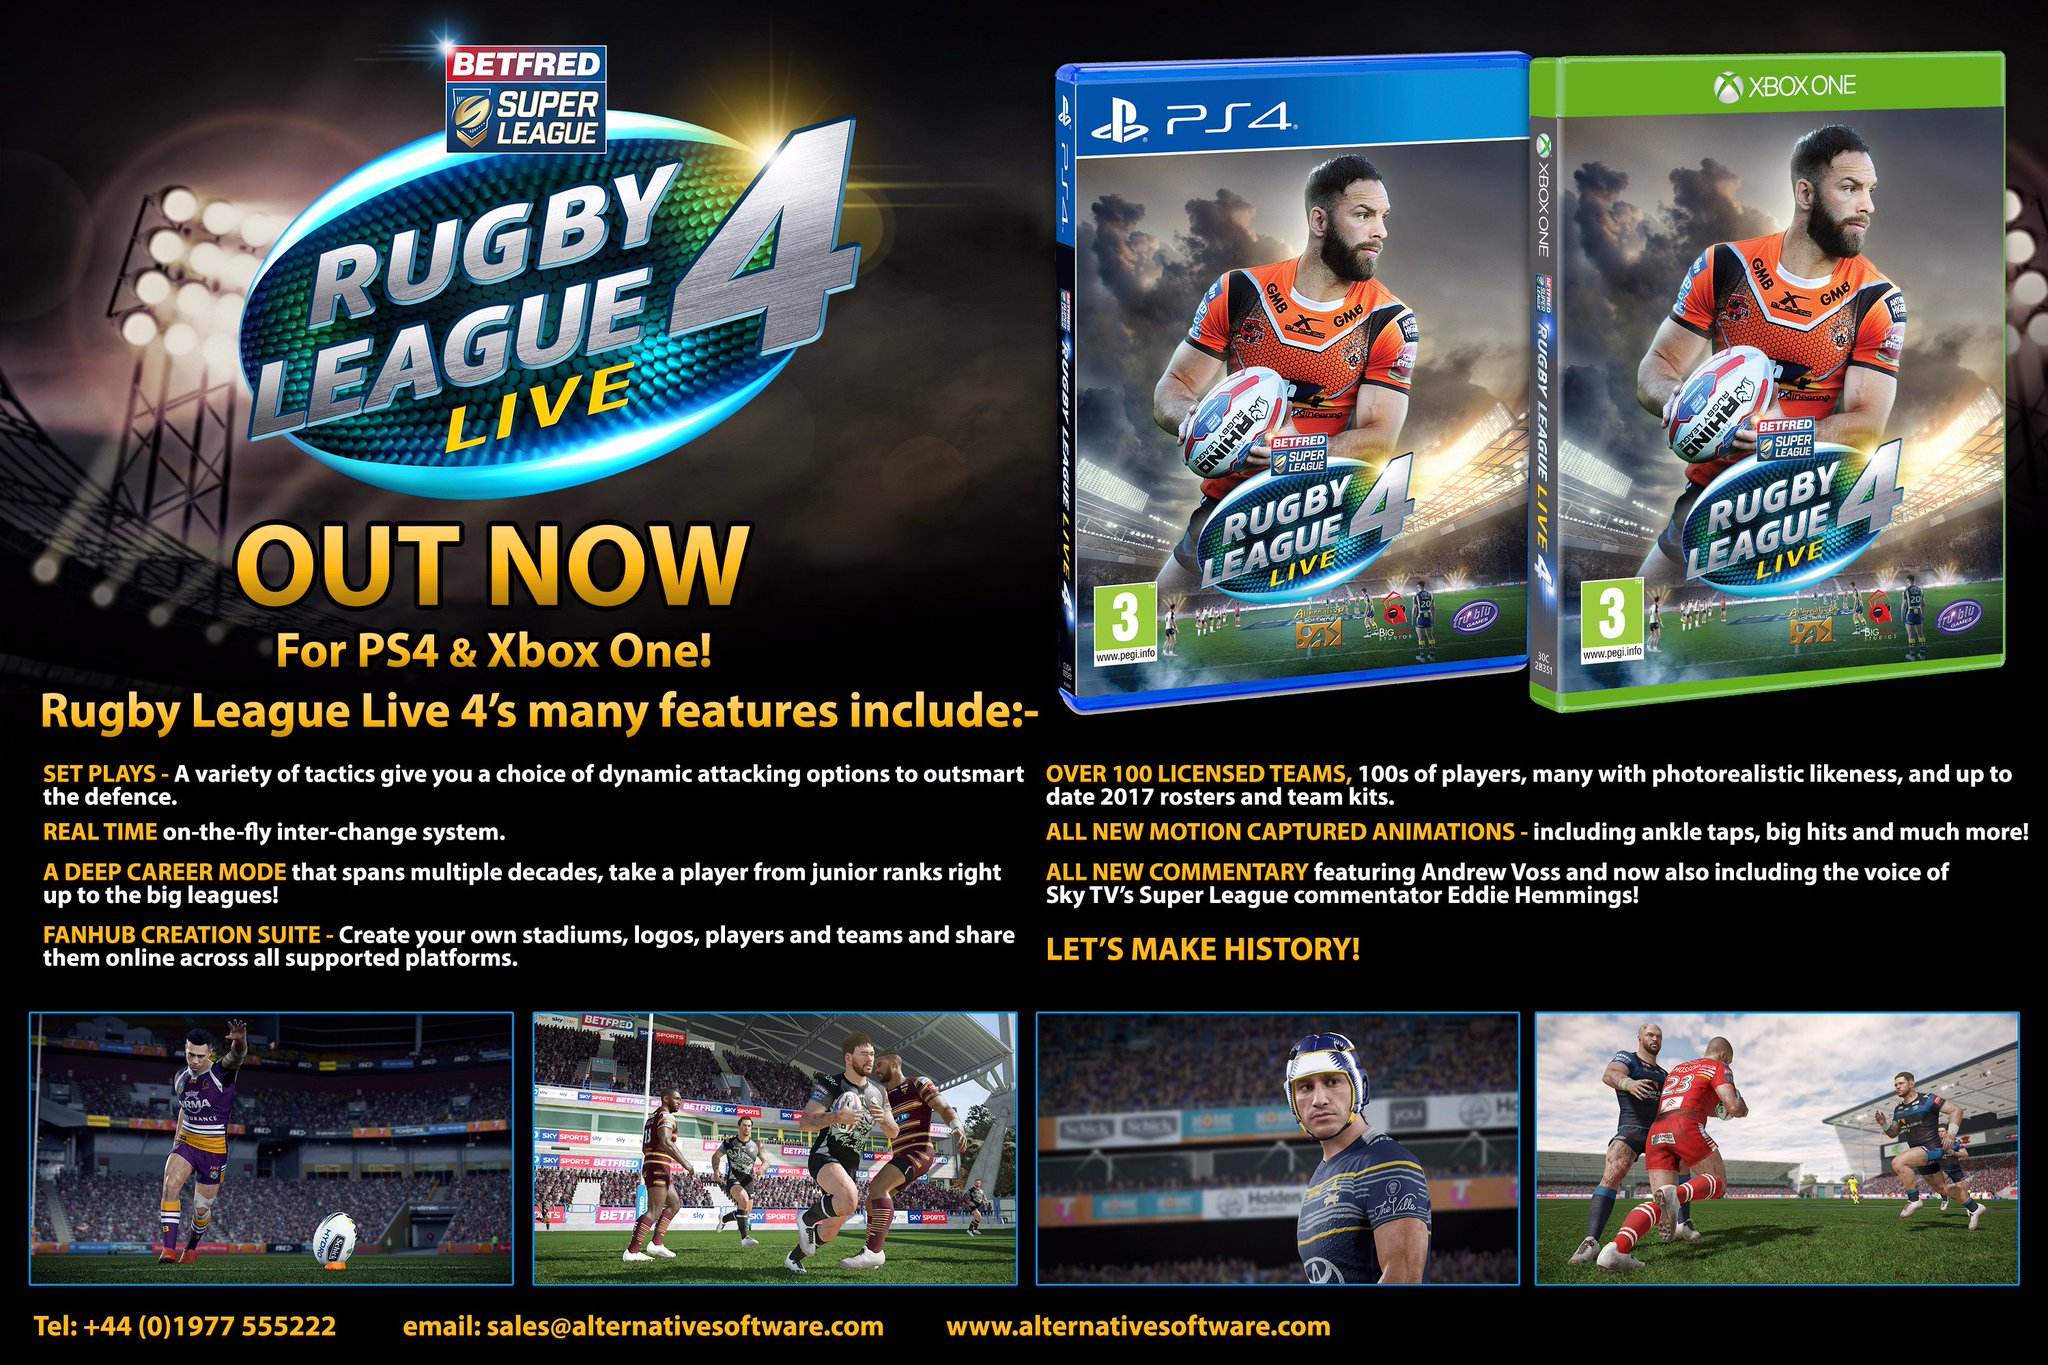 Rugby League Live 4 on X